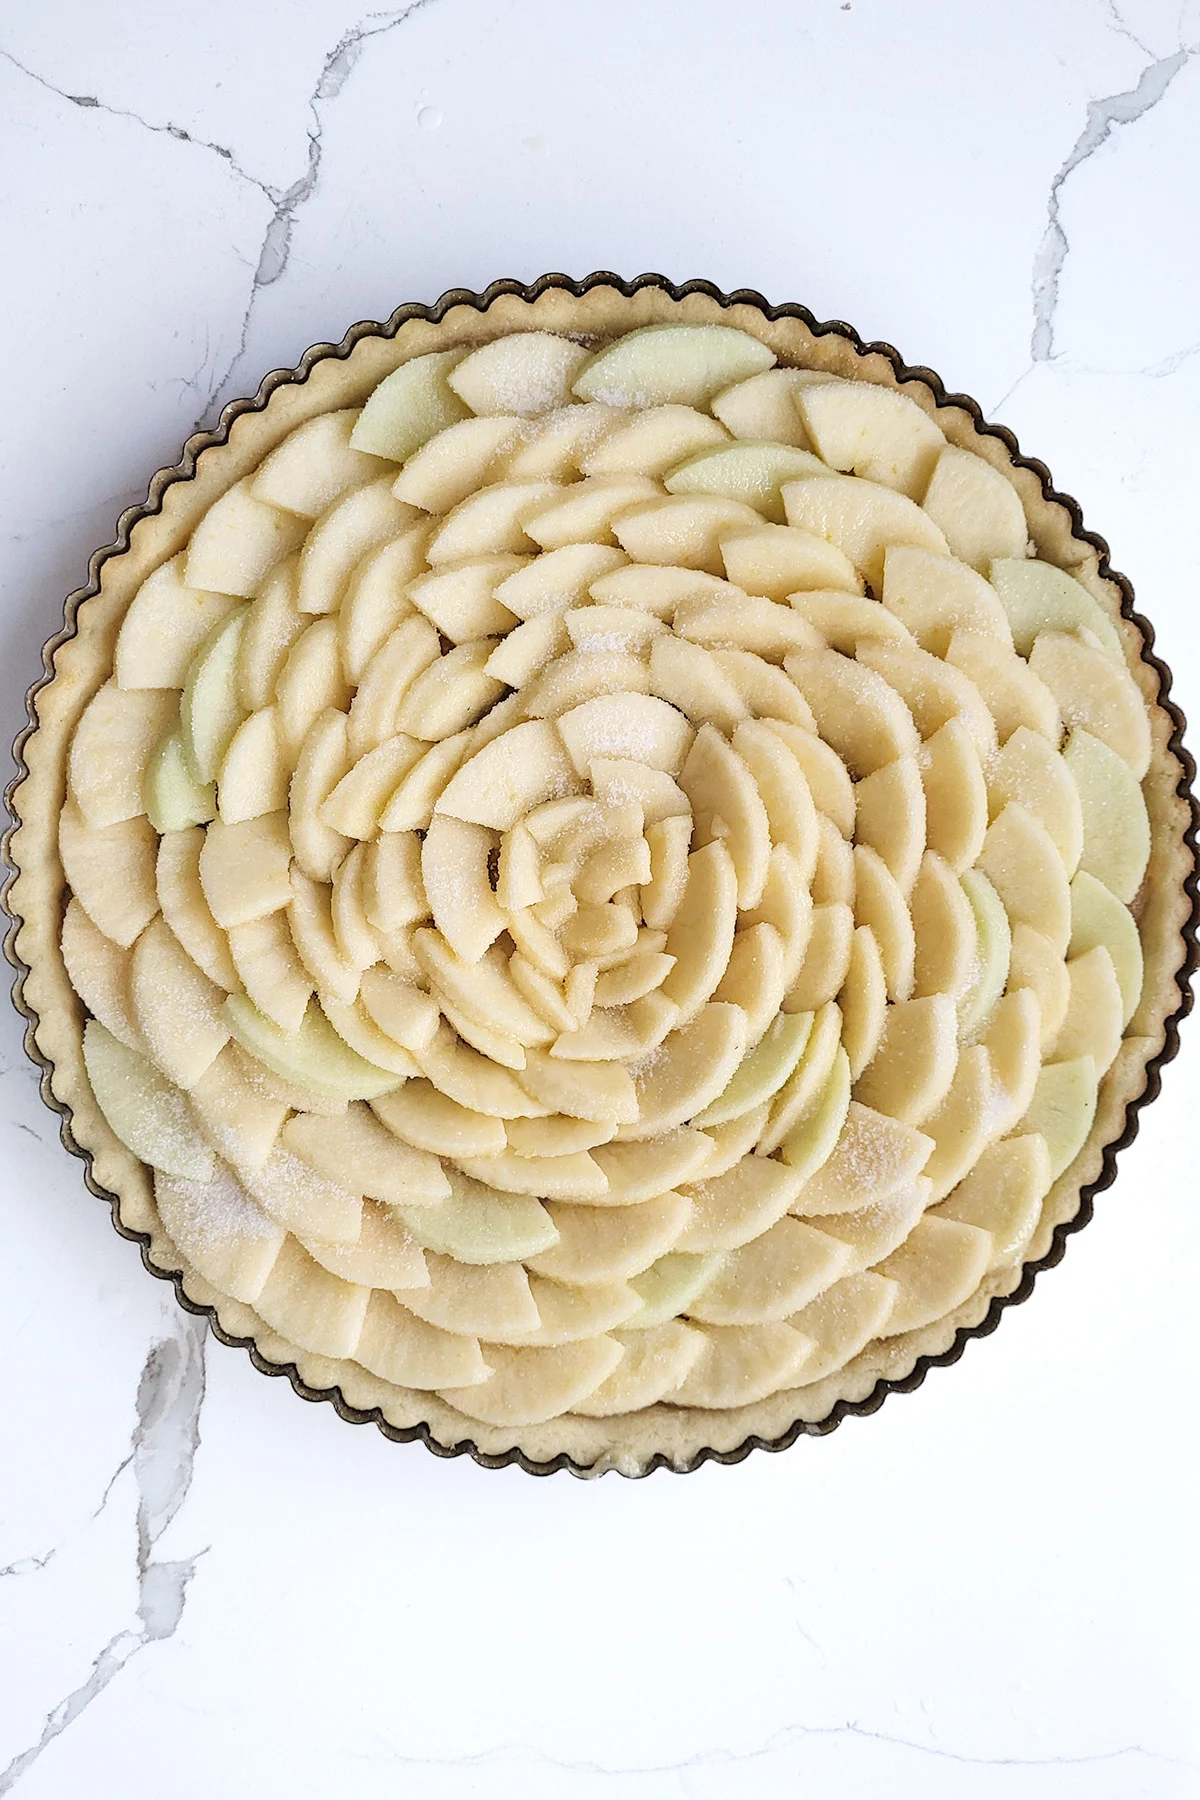 an unbaked apple tart on a white surface.